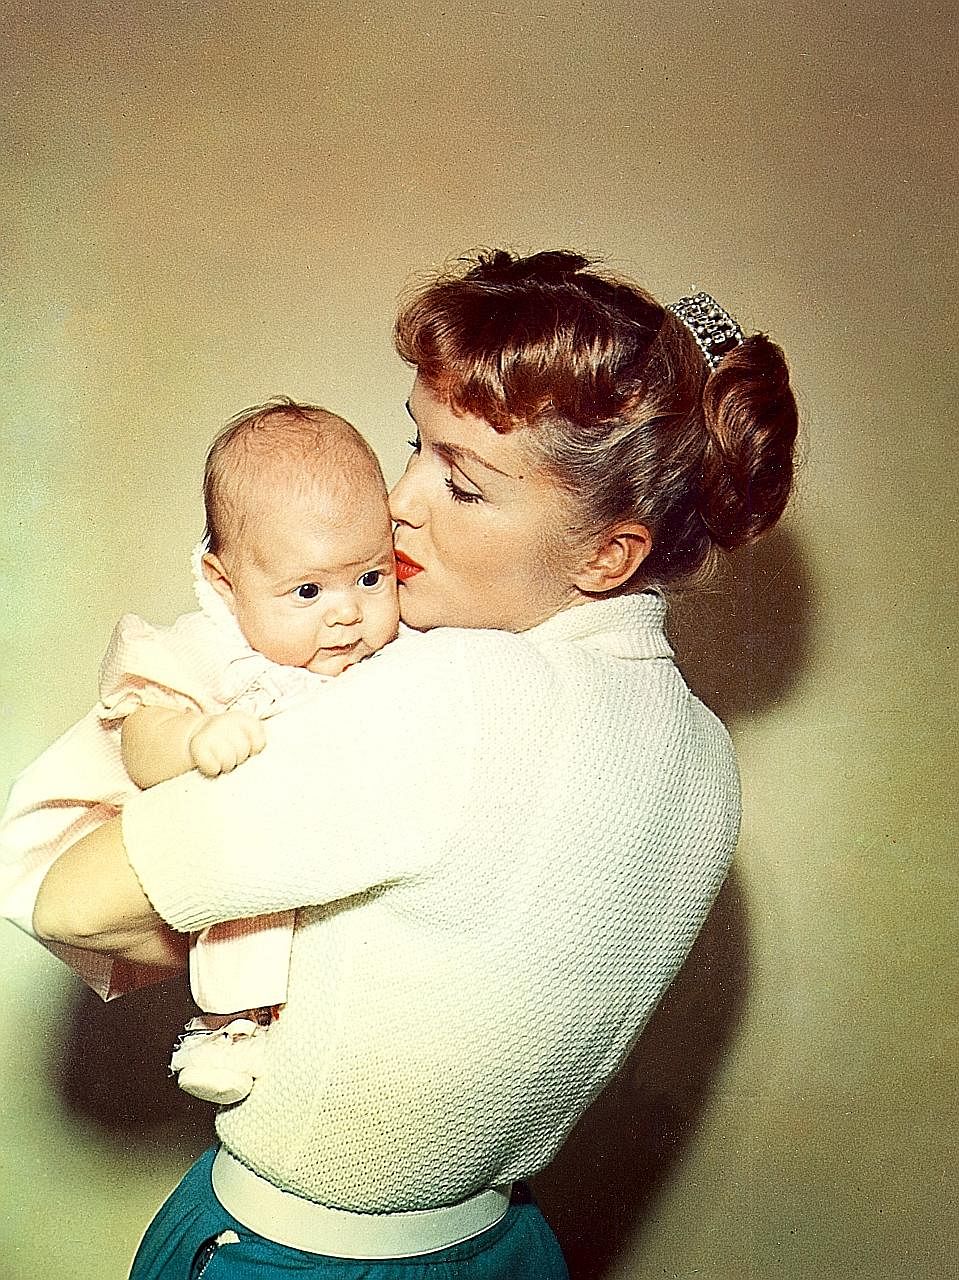 Debbie Reynolds and an infant Carrie Fisher in Bright Lights: Starring Carrie Fisher And Debbie Reynolds.